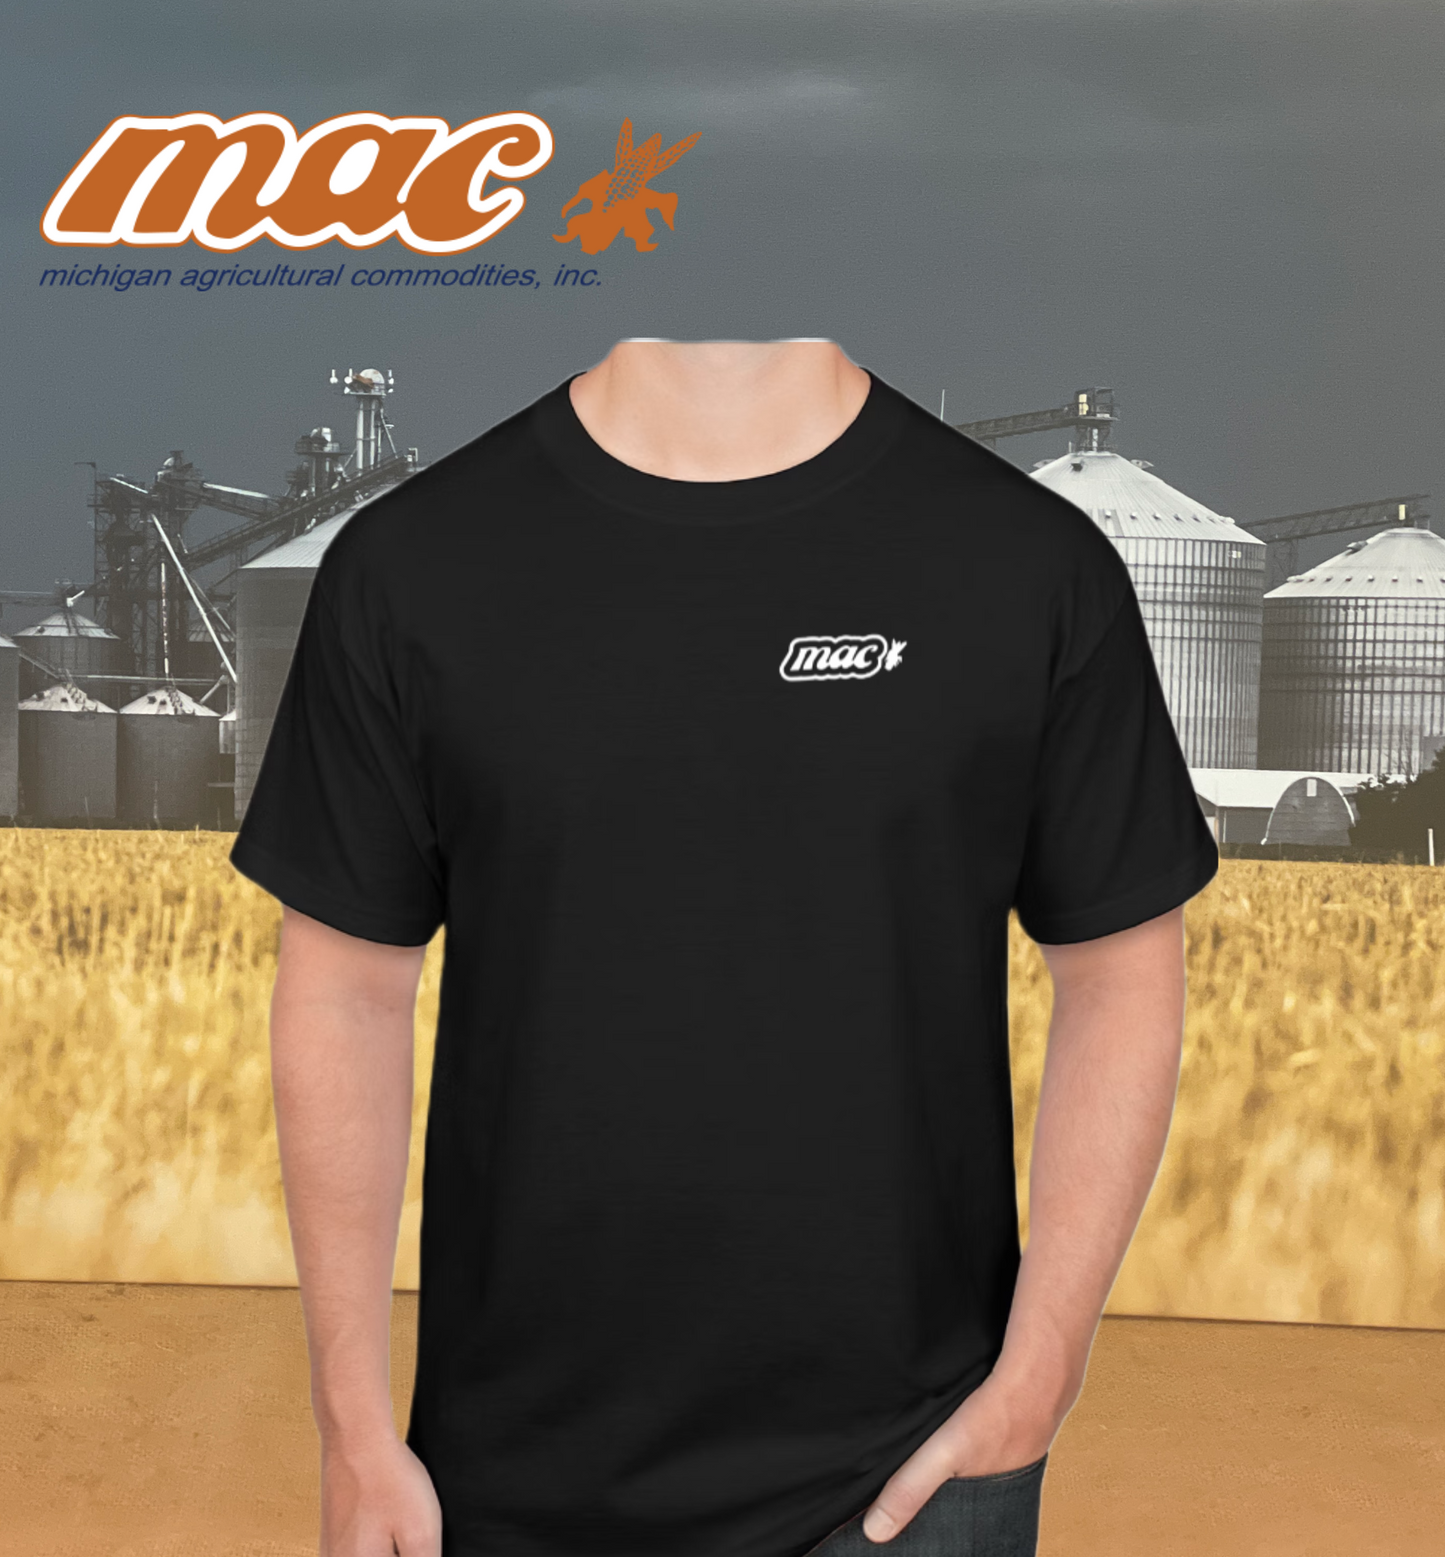 M.A.C. Support Your Local Farmers T-Shirt - BLACK